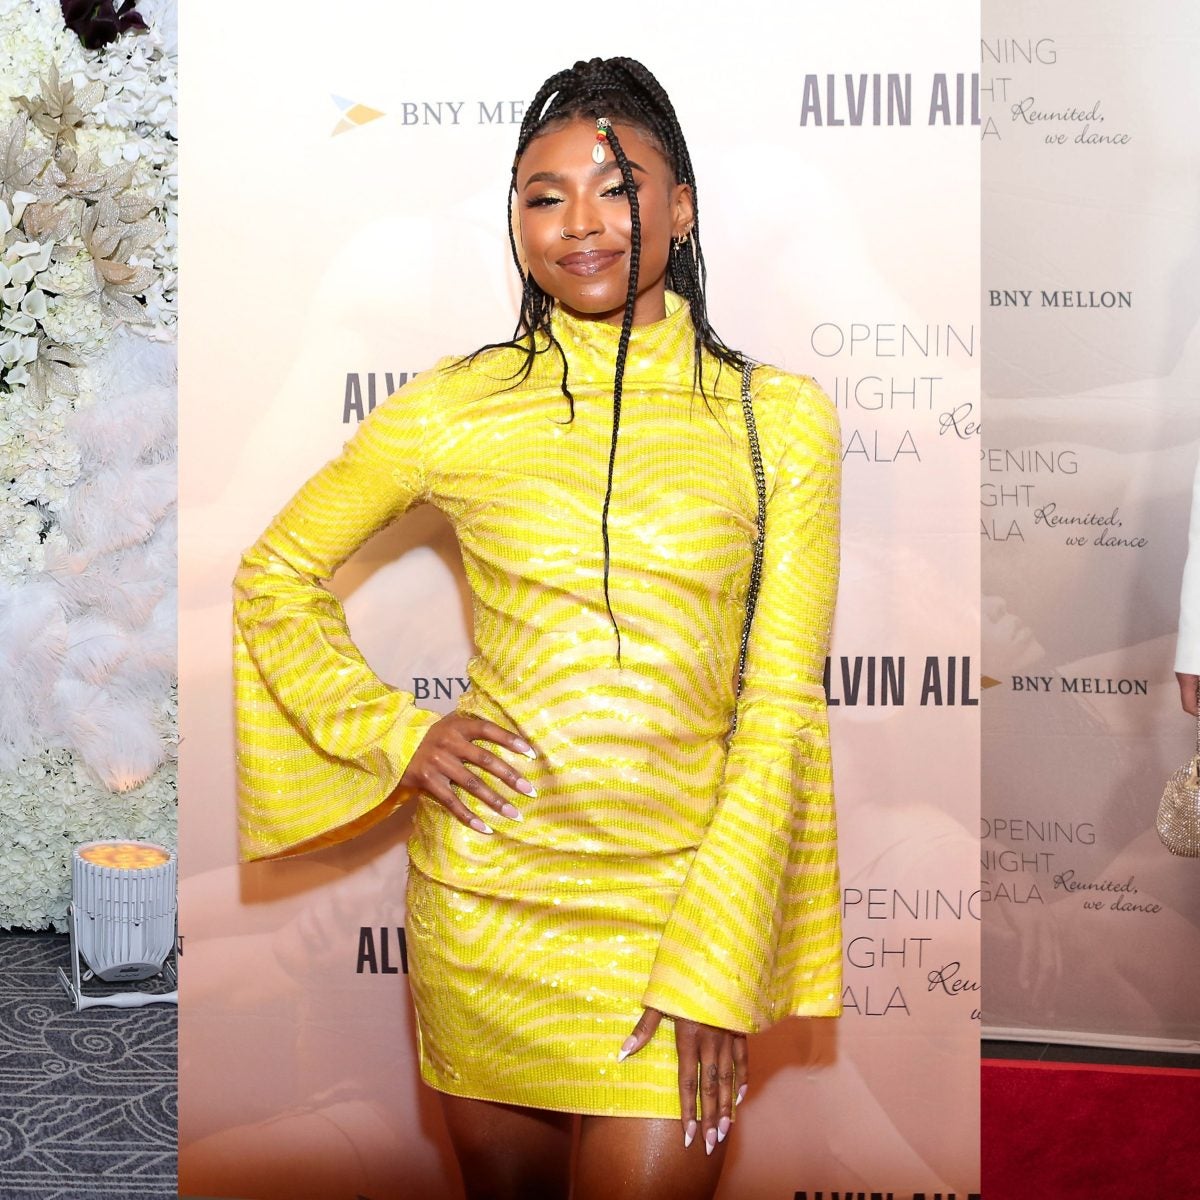 How Attending Alvin Ailey's Opening Night Gala Reminded Me About The Beauty Of Black People